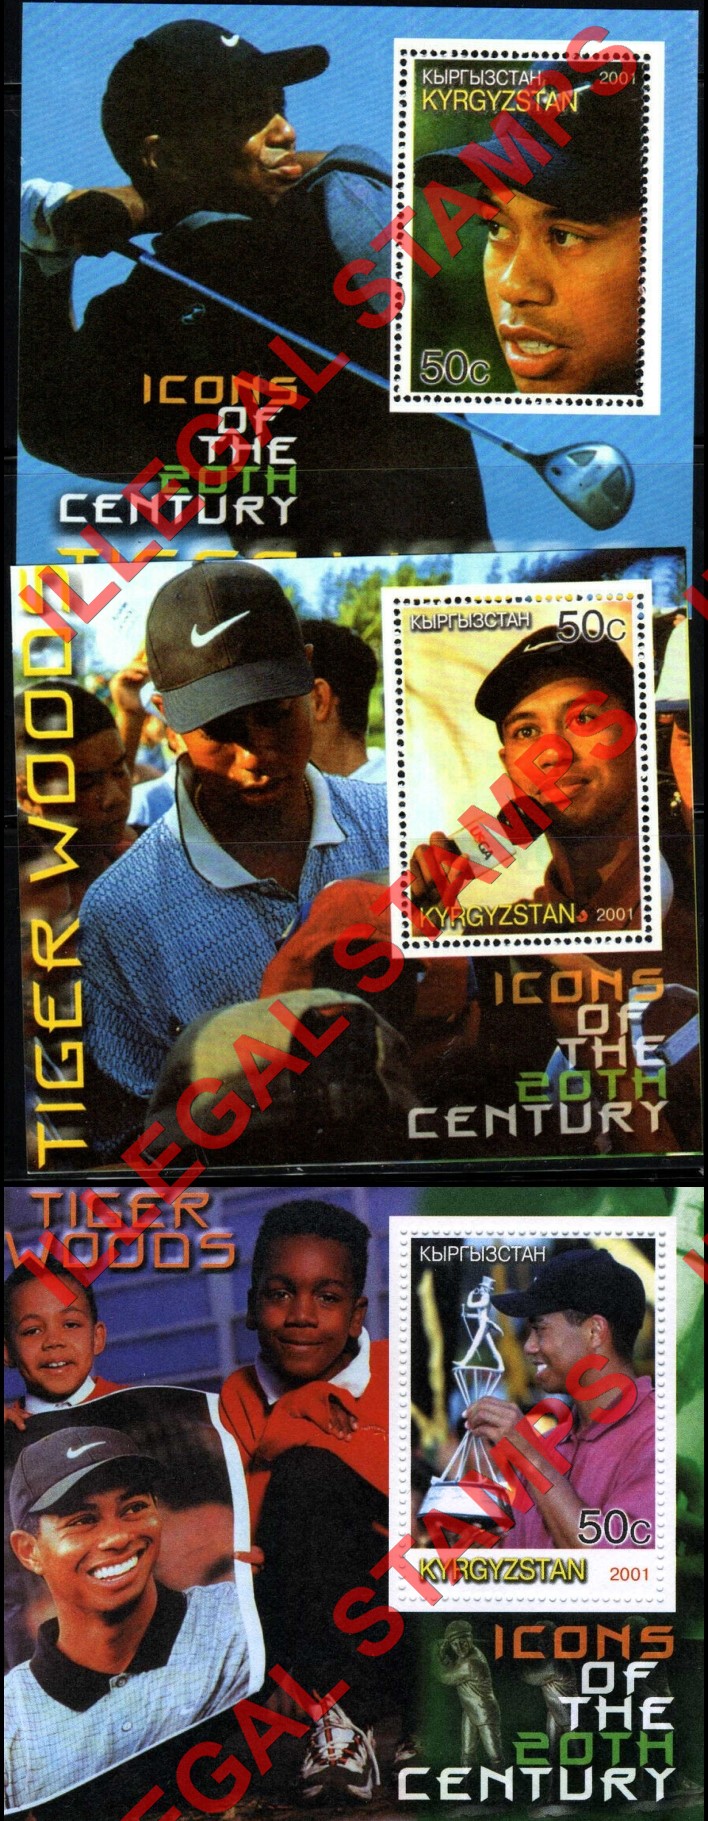 Kyrgyzstan 2001 Tiger Woods Illegal Stamp Souvenir Sheets of One